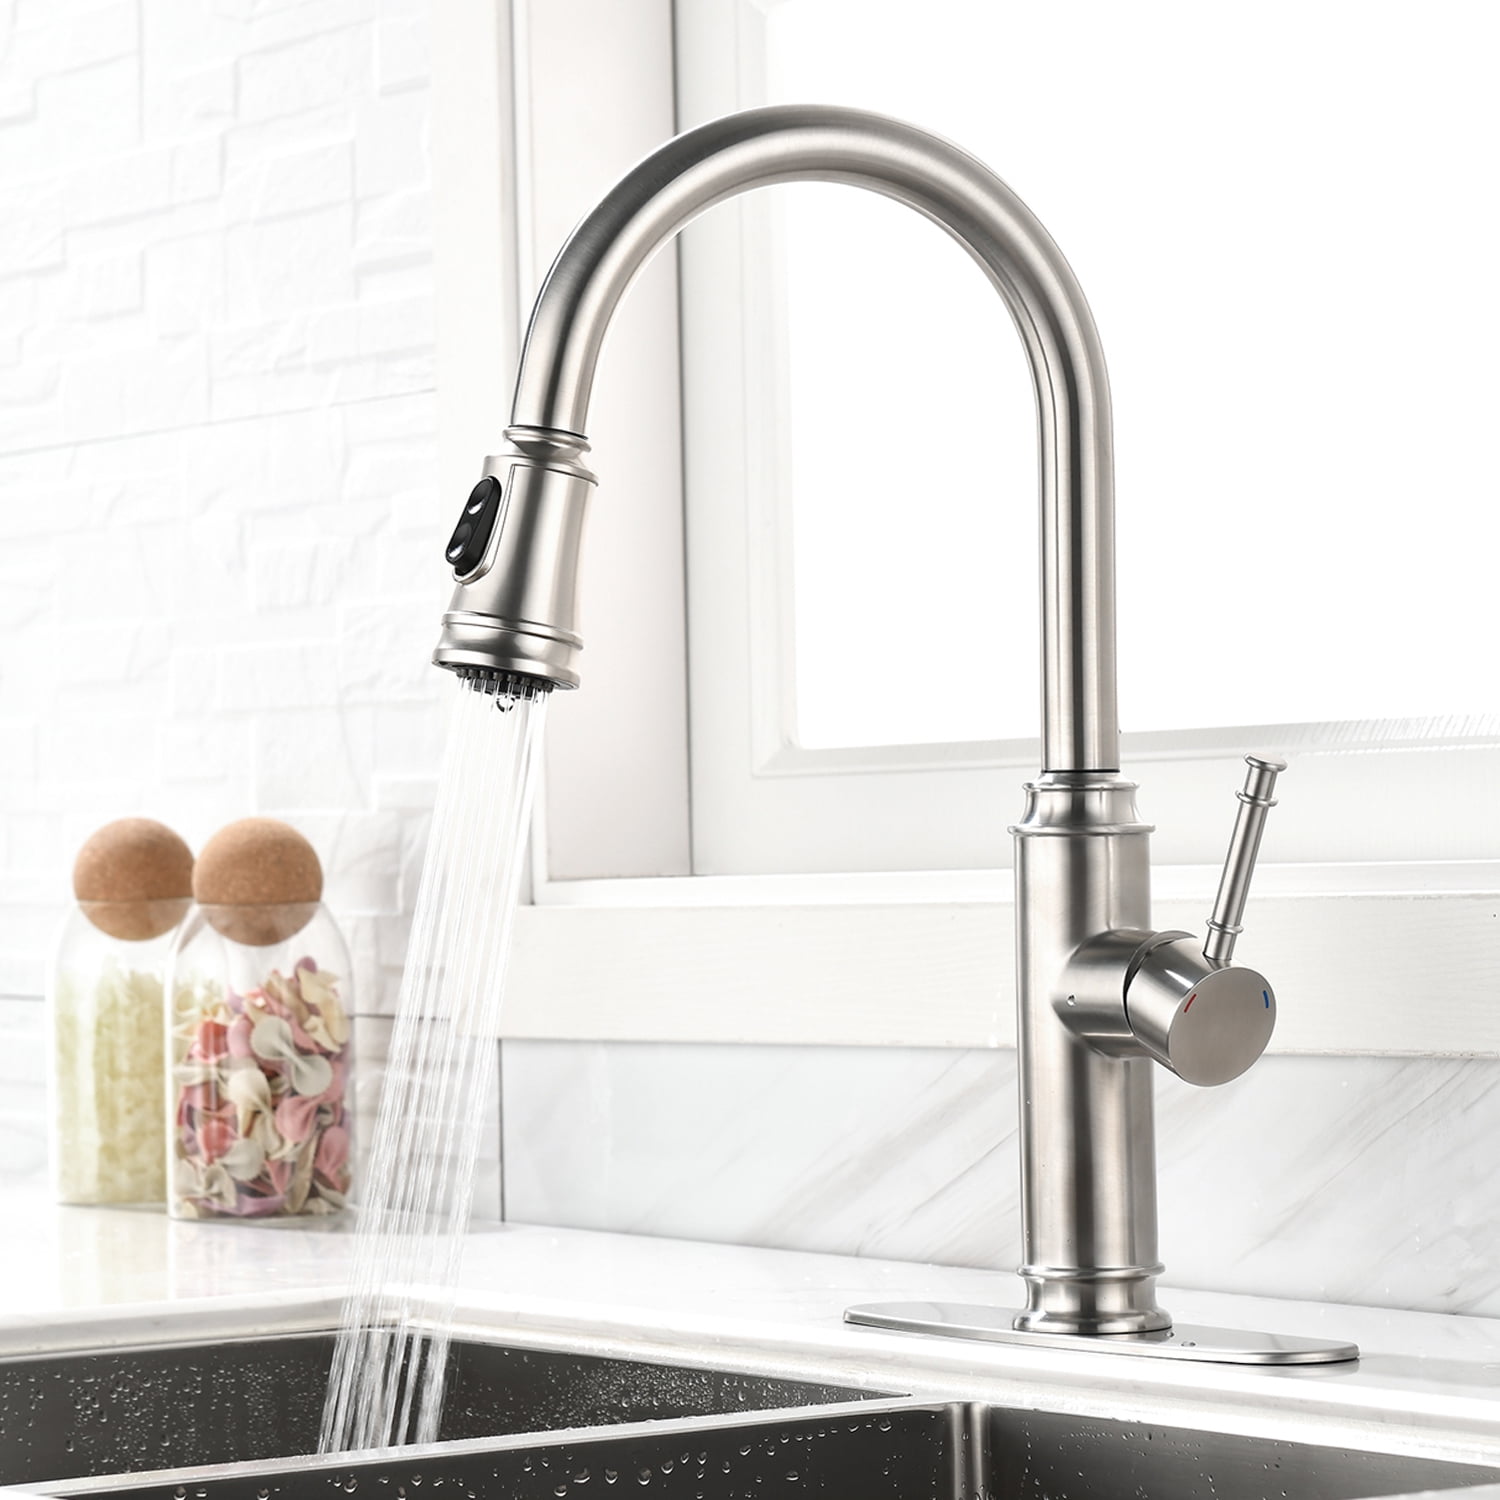 UWR-Nite Single Handle High Arc Pull Out Kitchen Faucet, Single Level ...